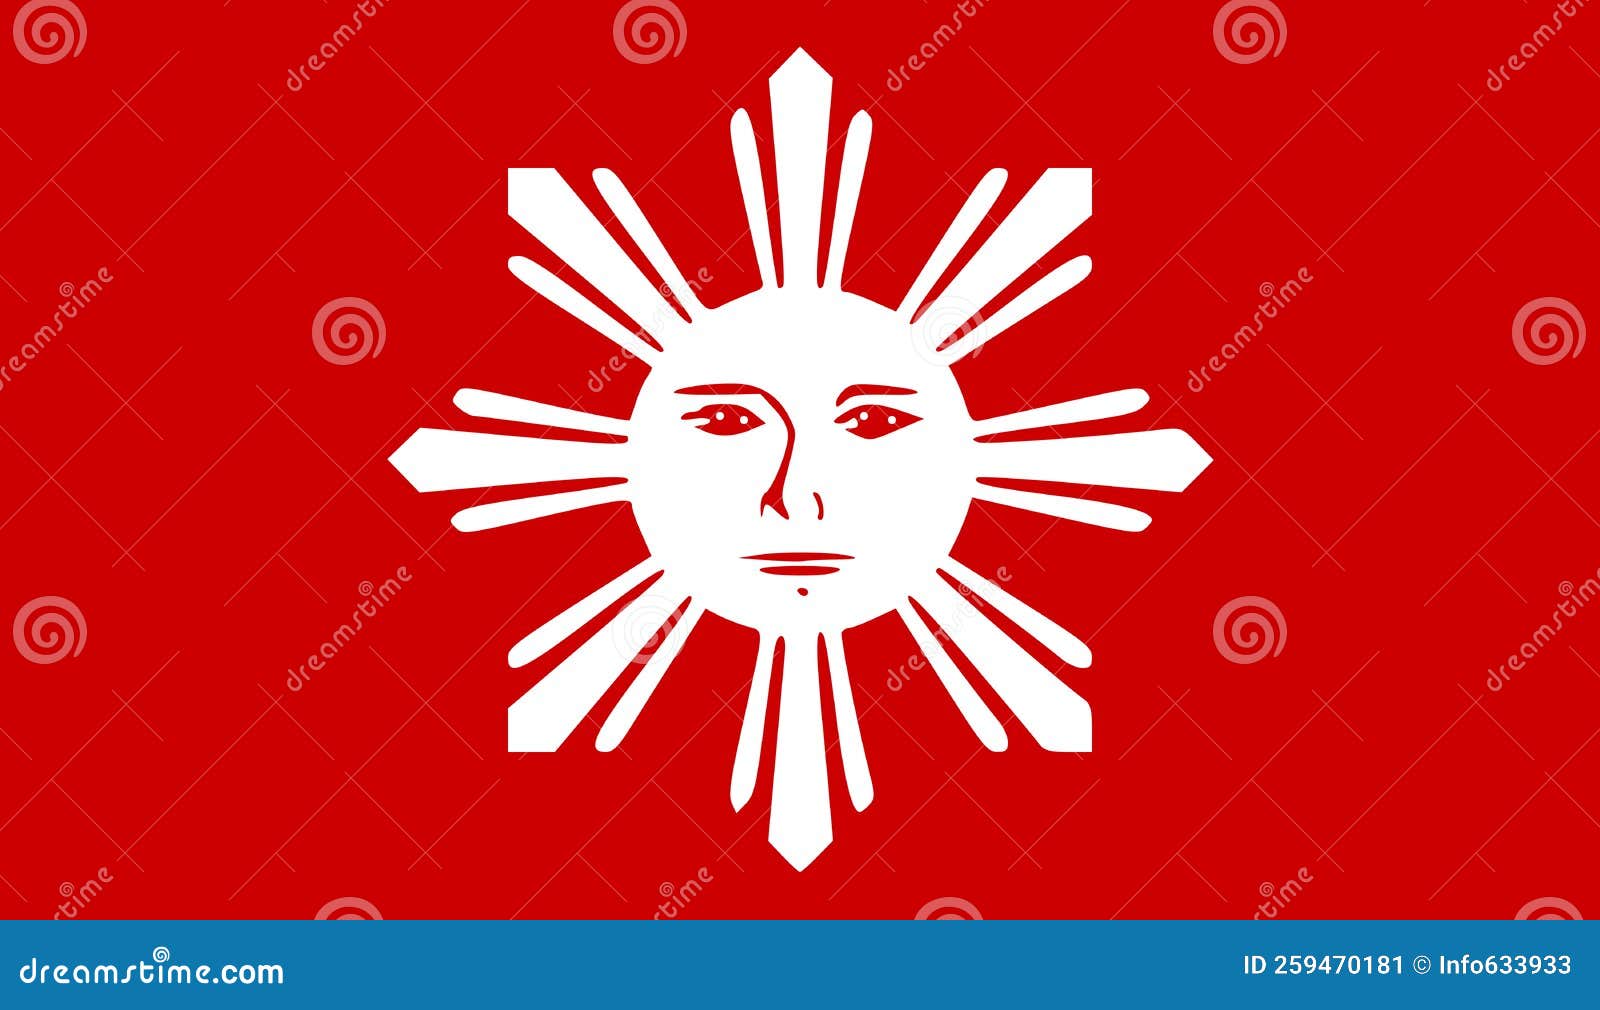 flag of tagalog people, asia. flag representing extinct country, ethnic group or culture, regional authorities. no flagpole. plane